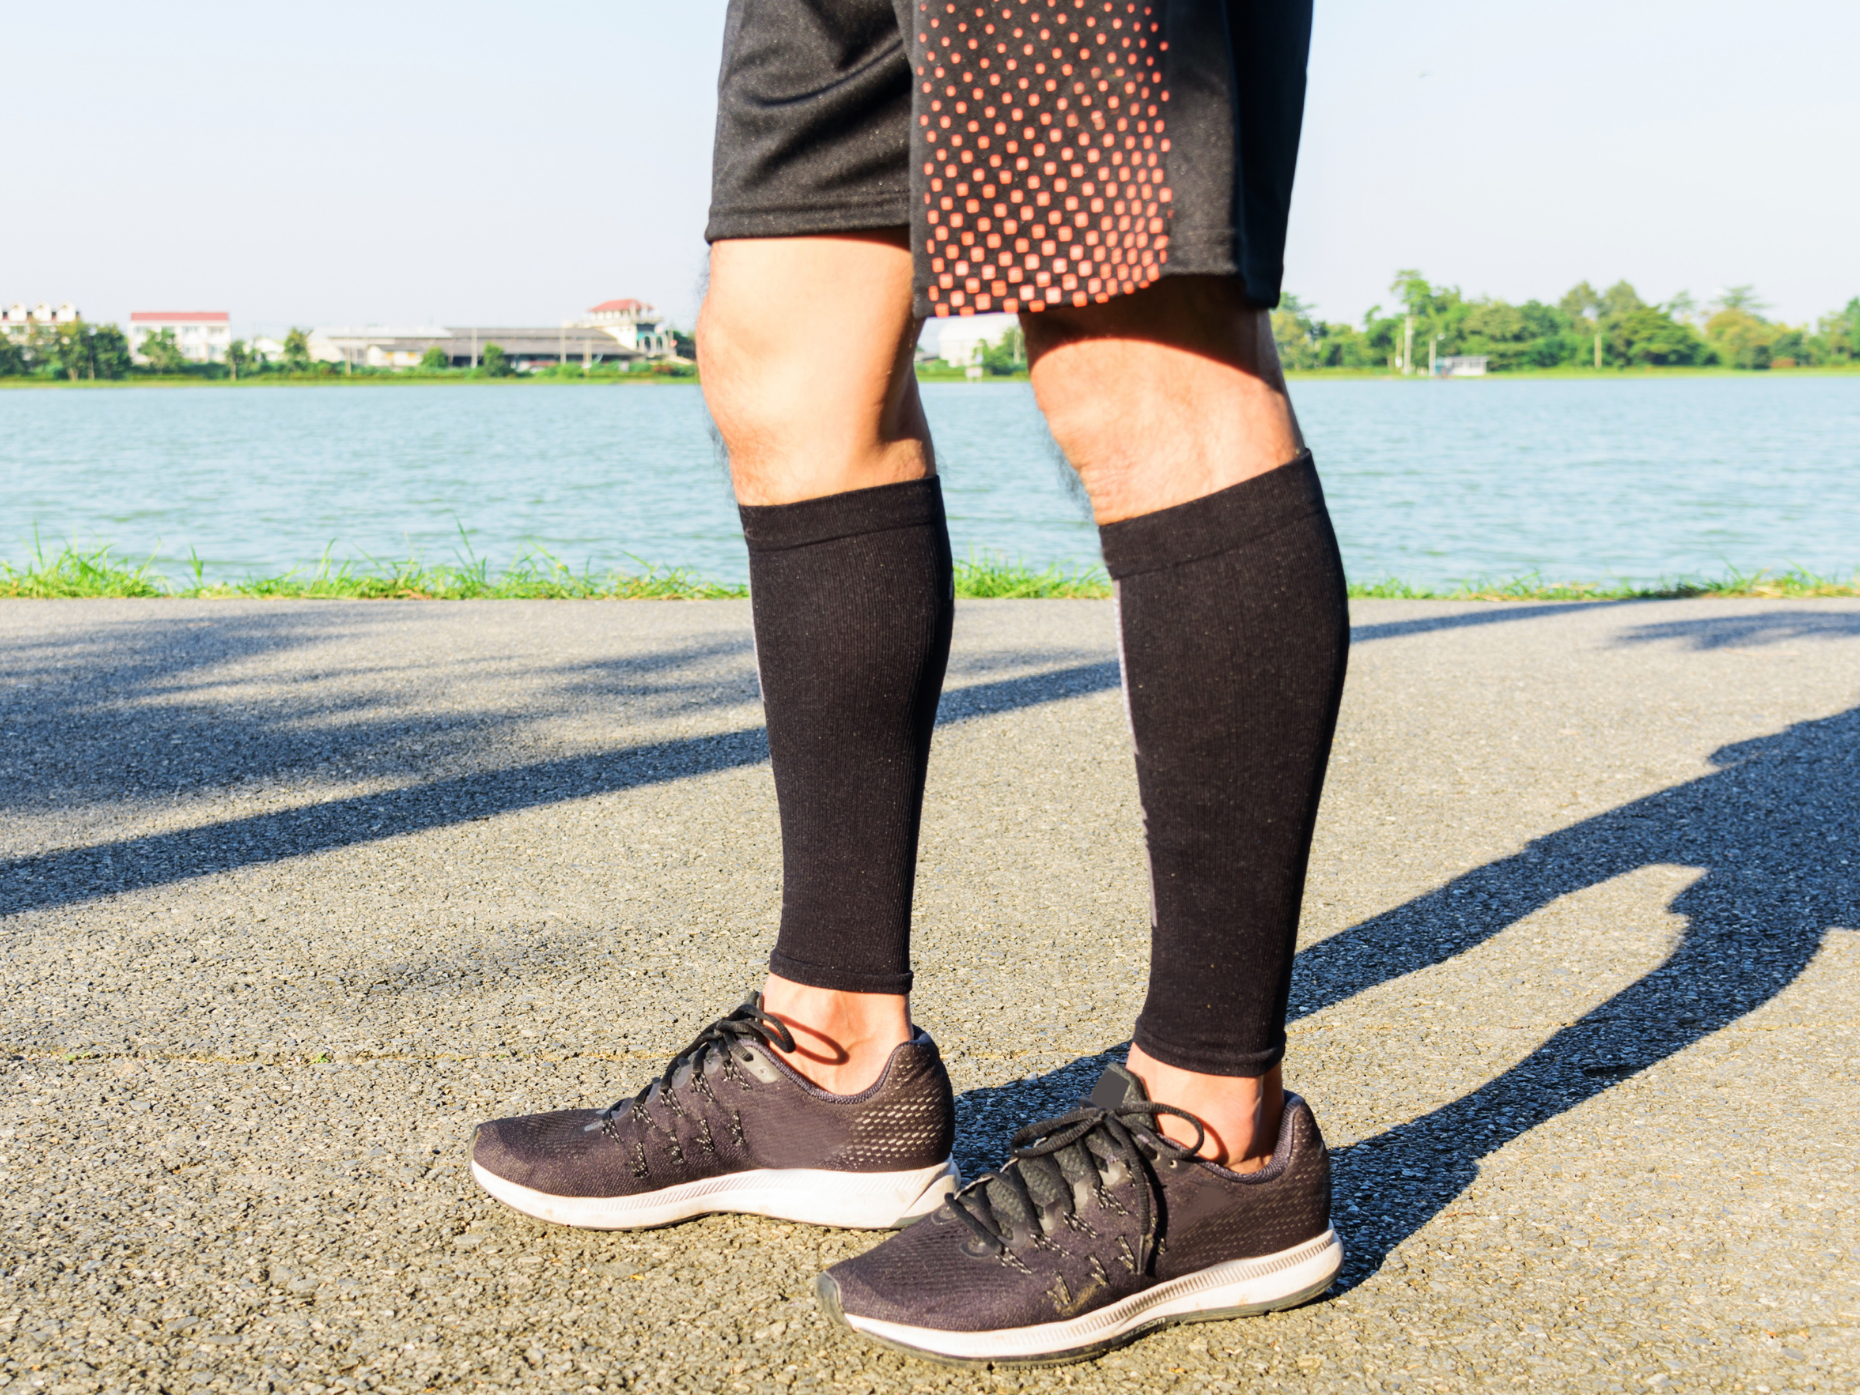 Compression sleeves for calf strain: What you need to know